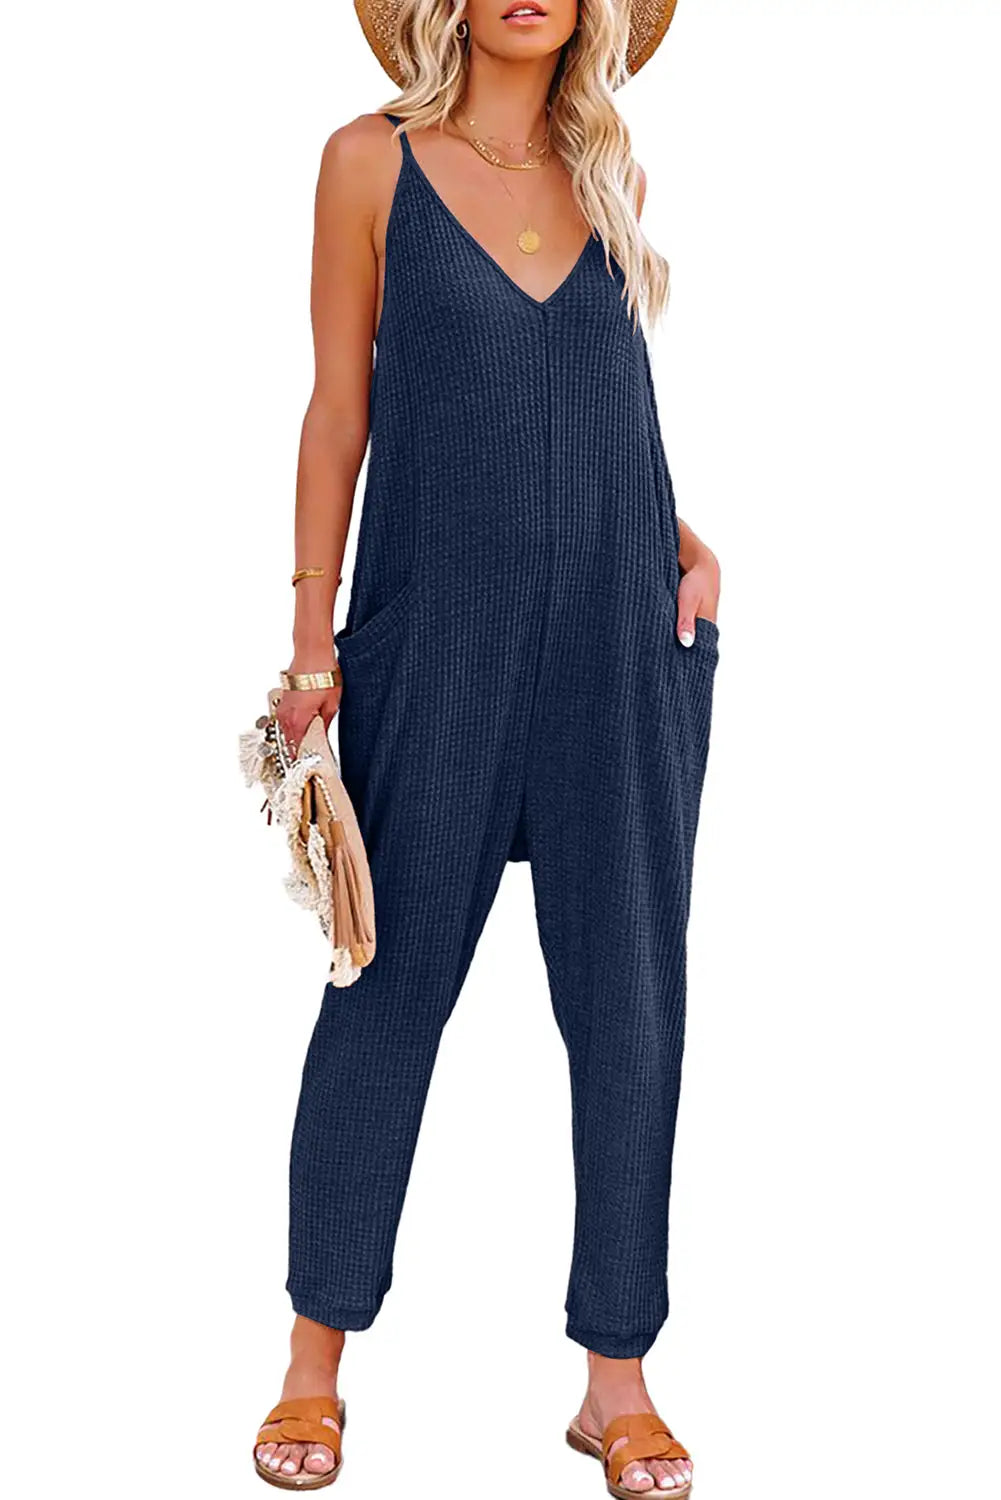 Black textured sleeveless v-neck pocketed casual jumpsuit - jumpsuits & rompers